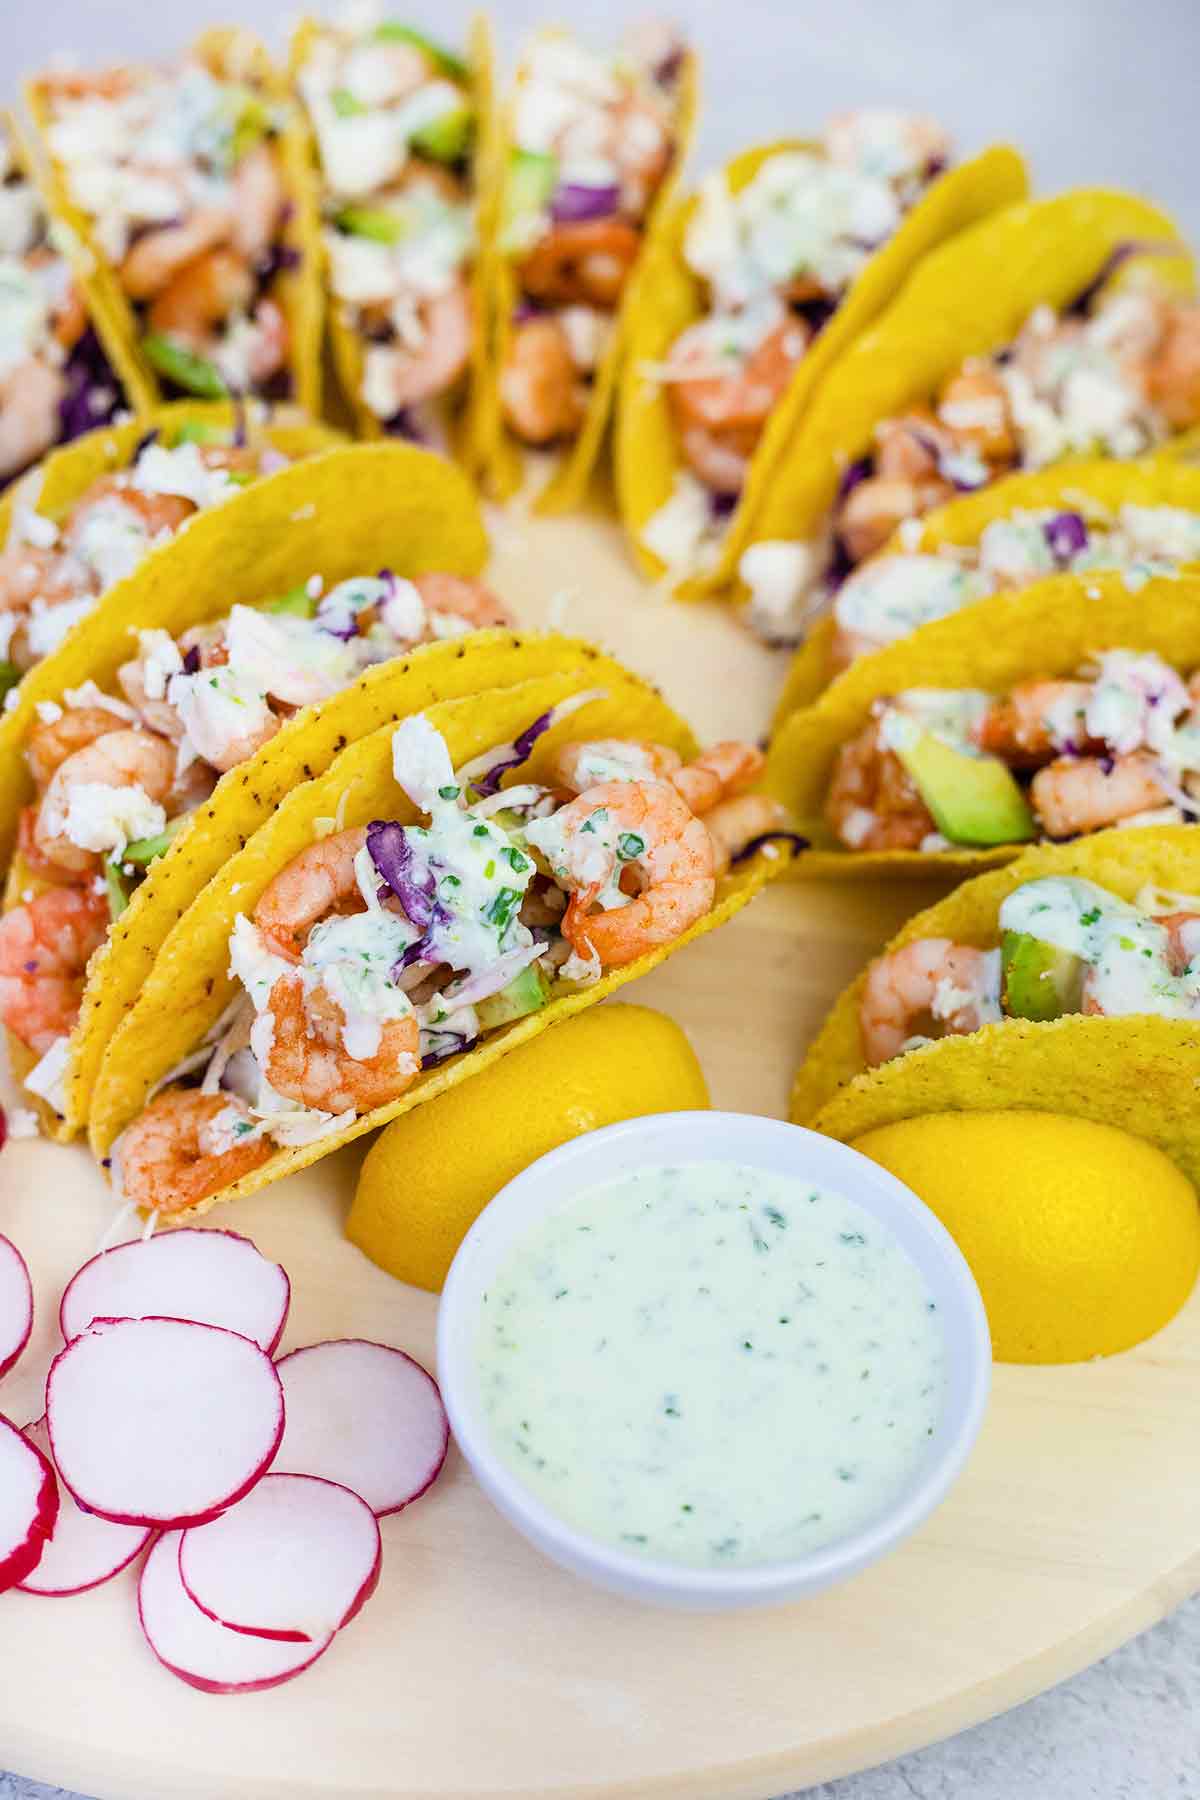 Prawn tacos topped with creamy sauce and lots of veggies.